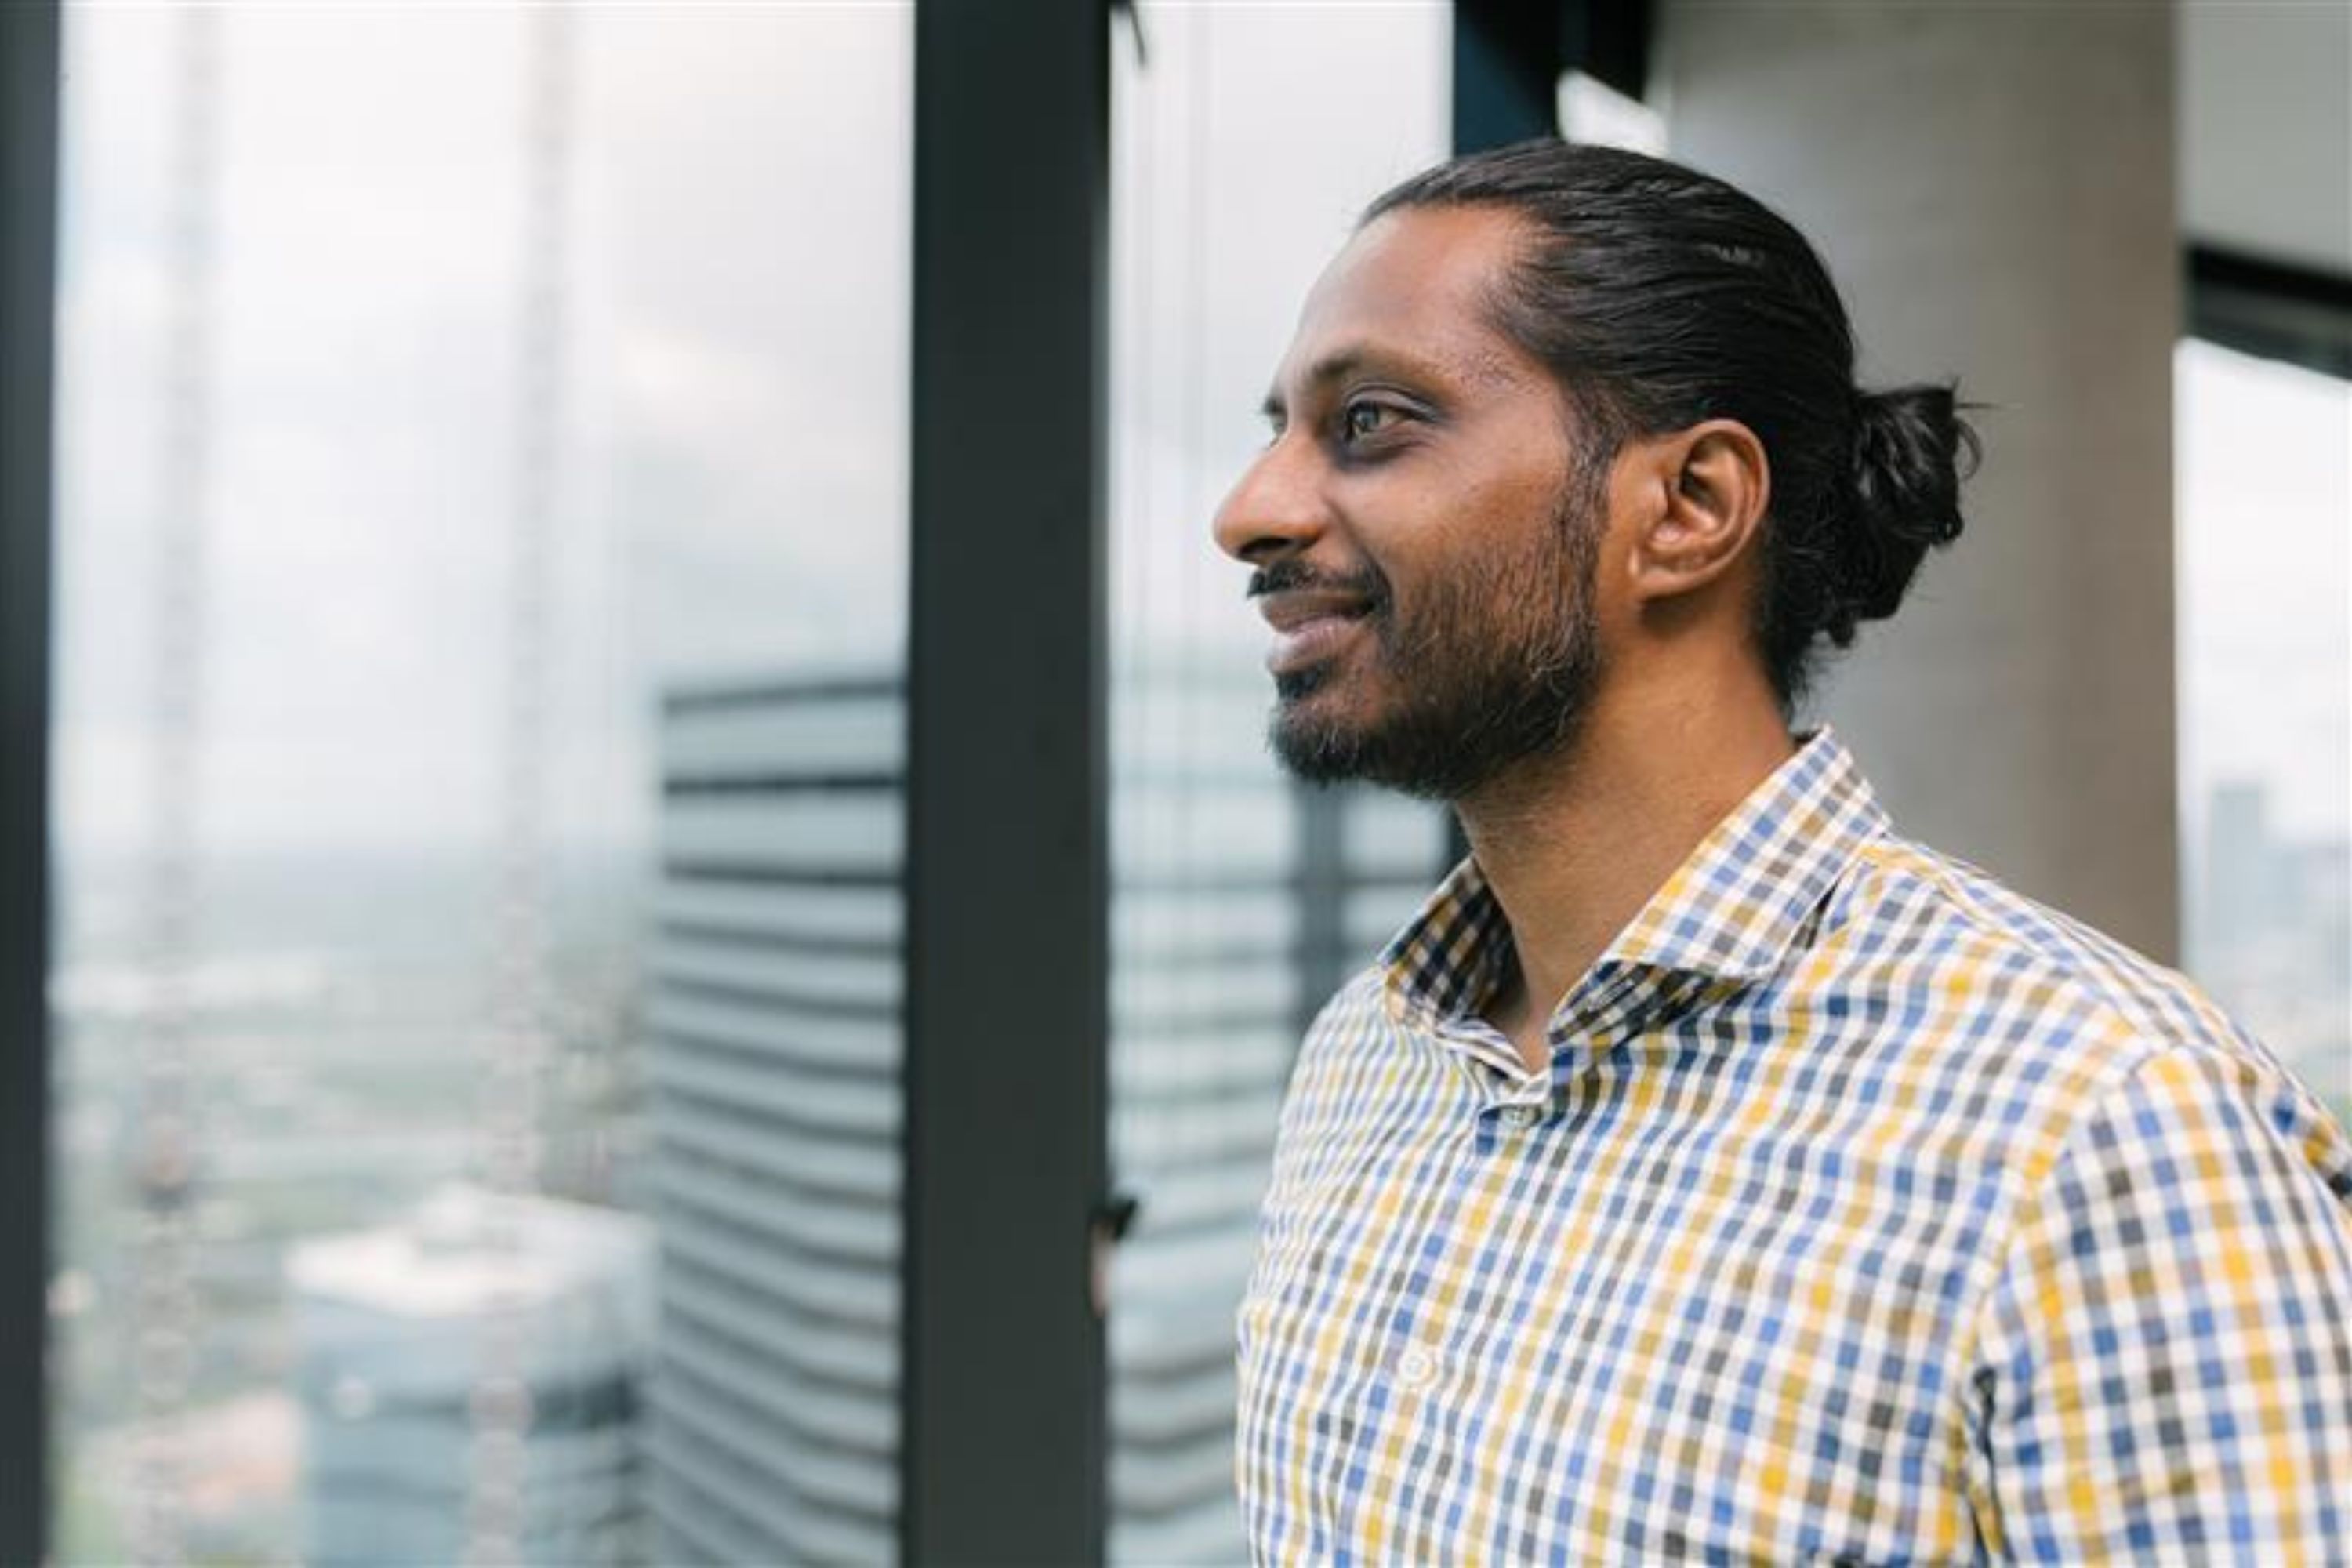 Side profile photograph of Vickesh looking out of a window over a city view.